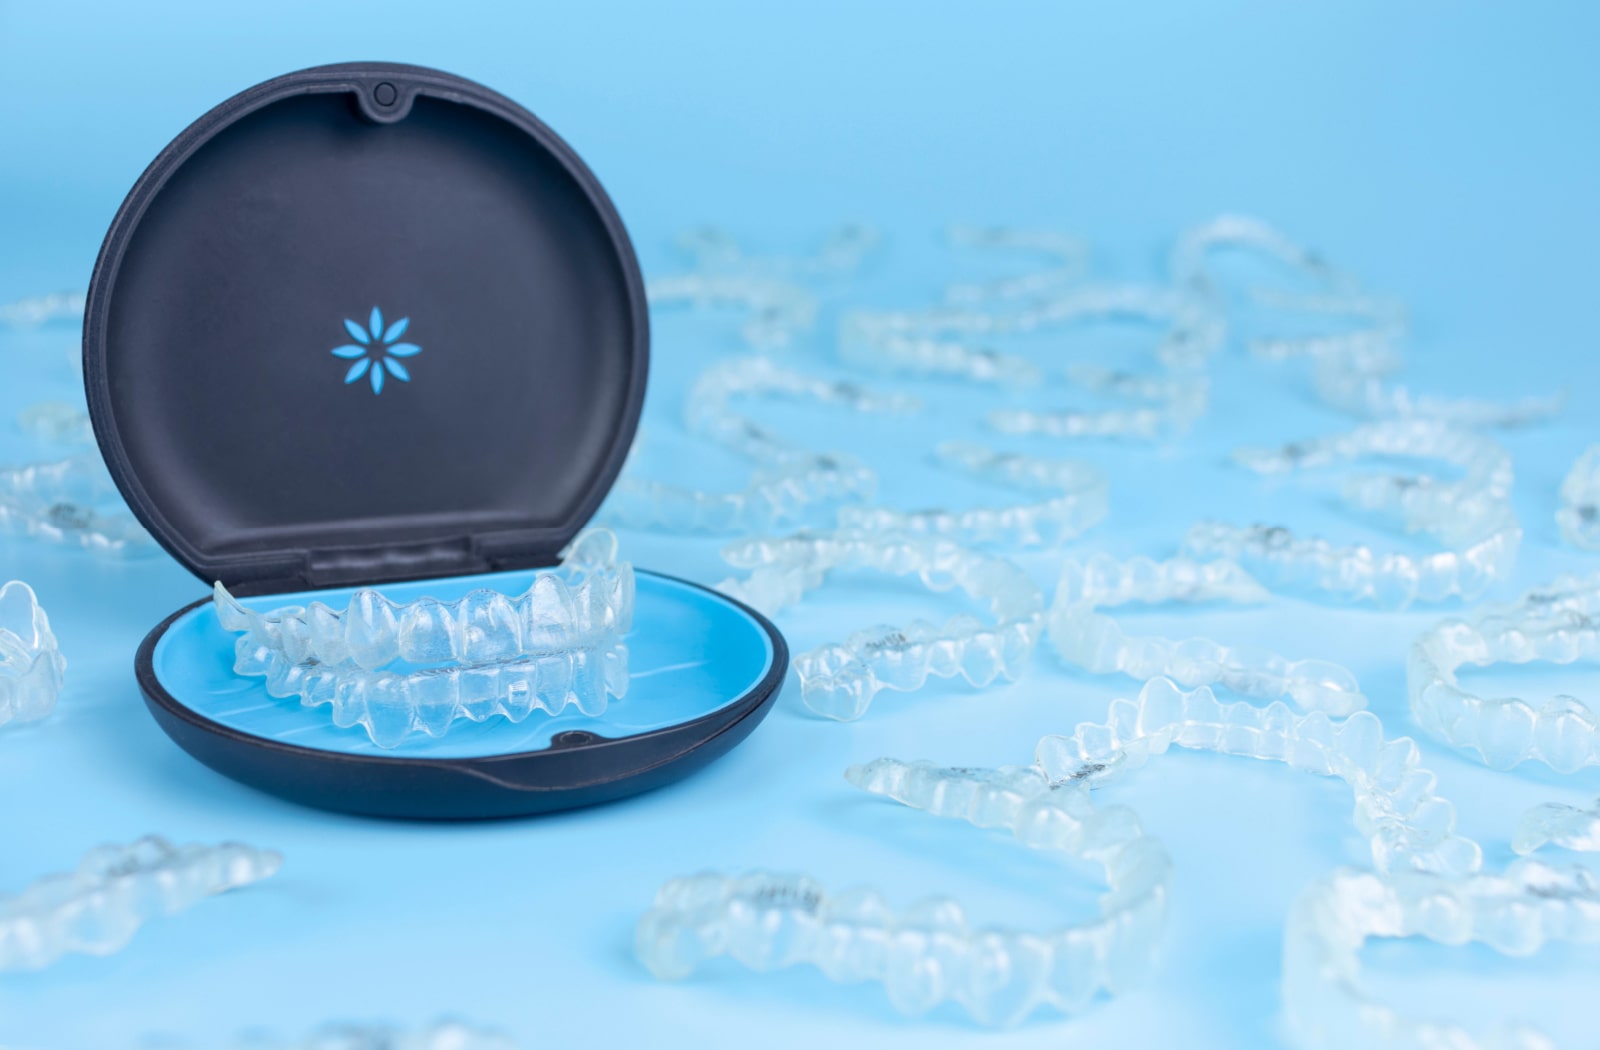 Several pairs of Invisalign 3D aligners sitting around an Invisalign branded case